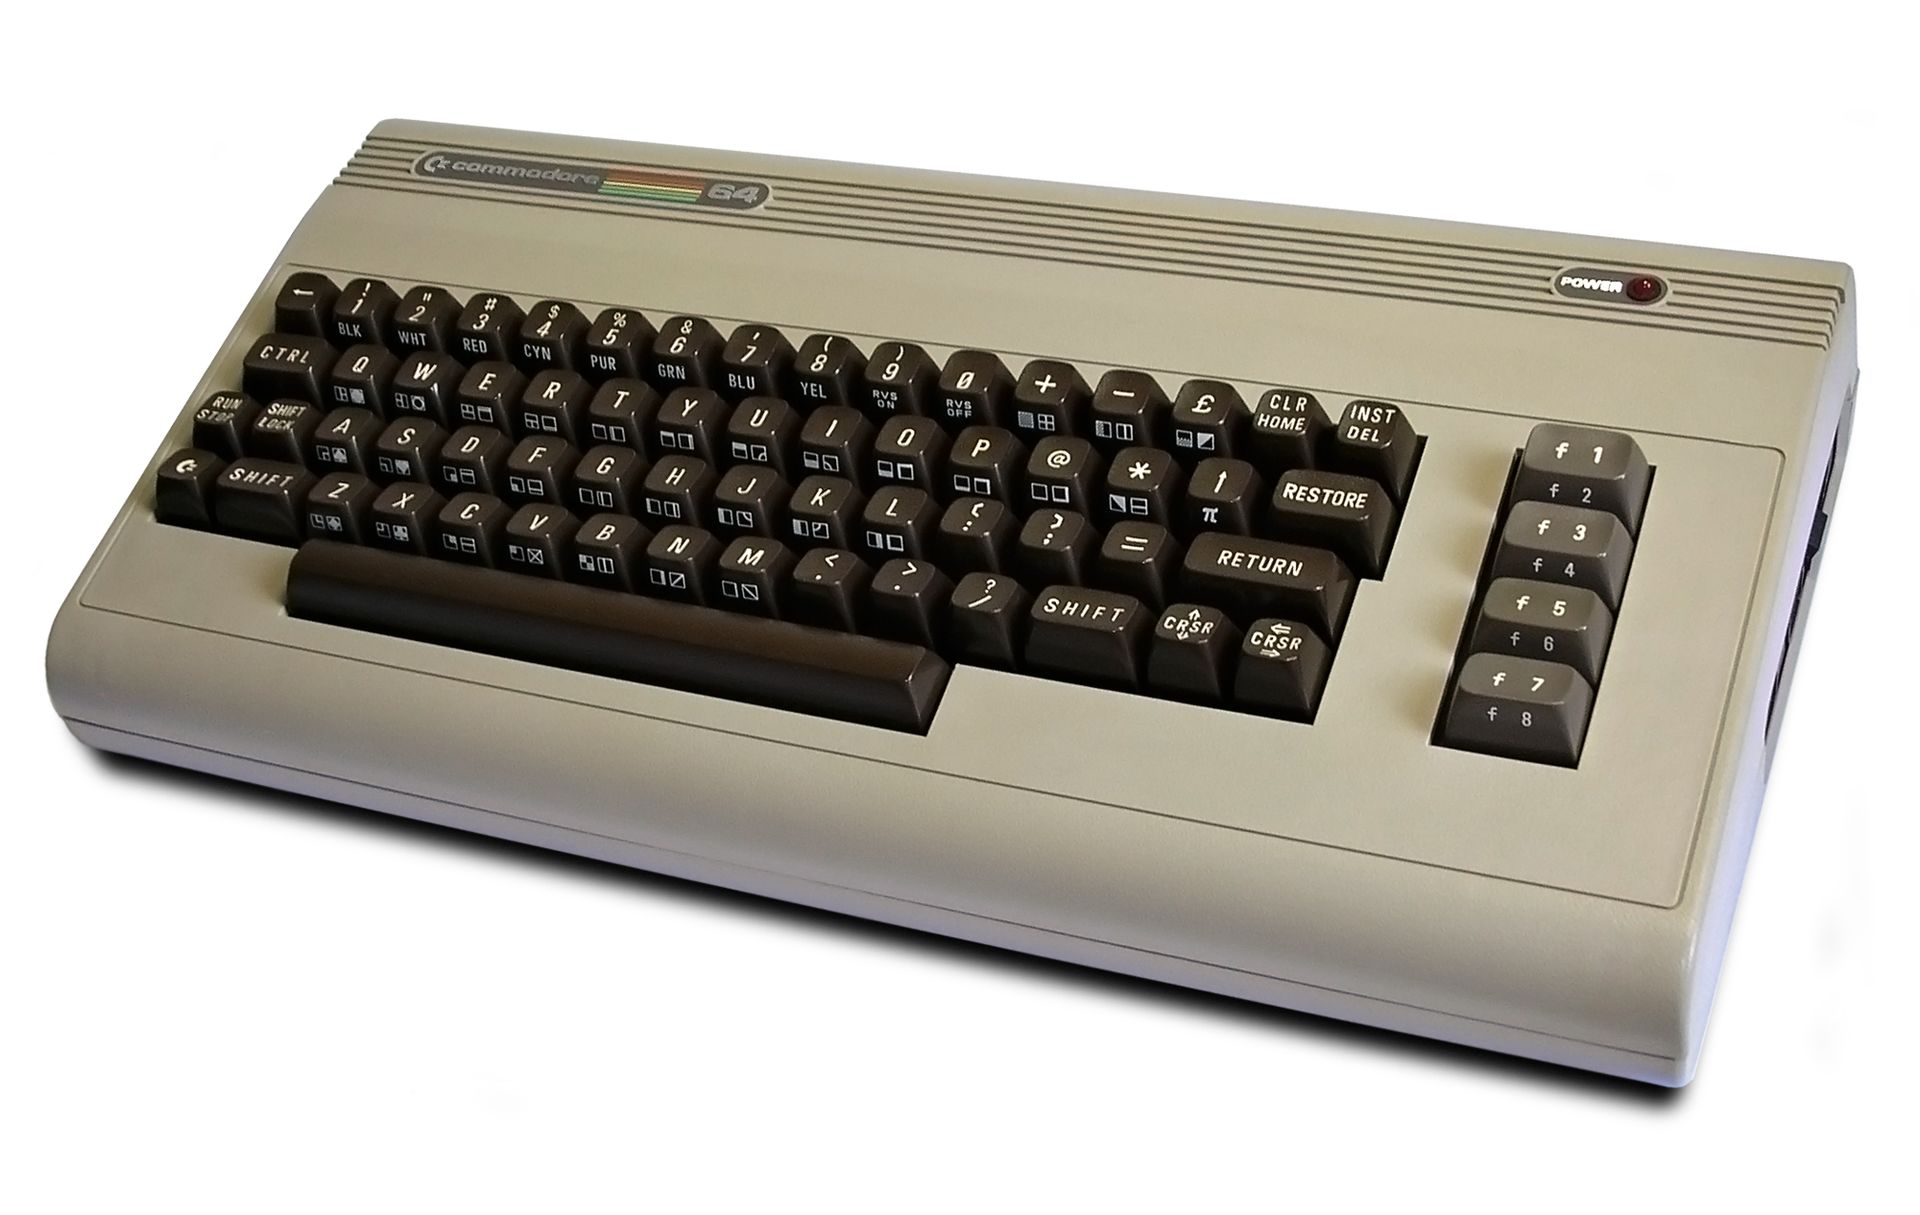 ../_images/Commodore64.jpeg